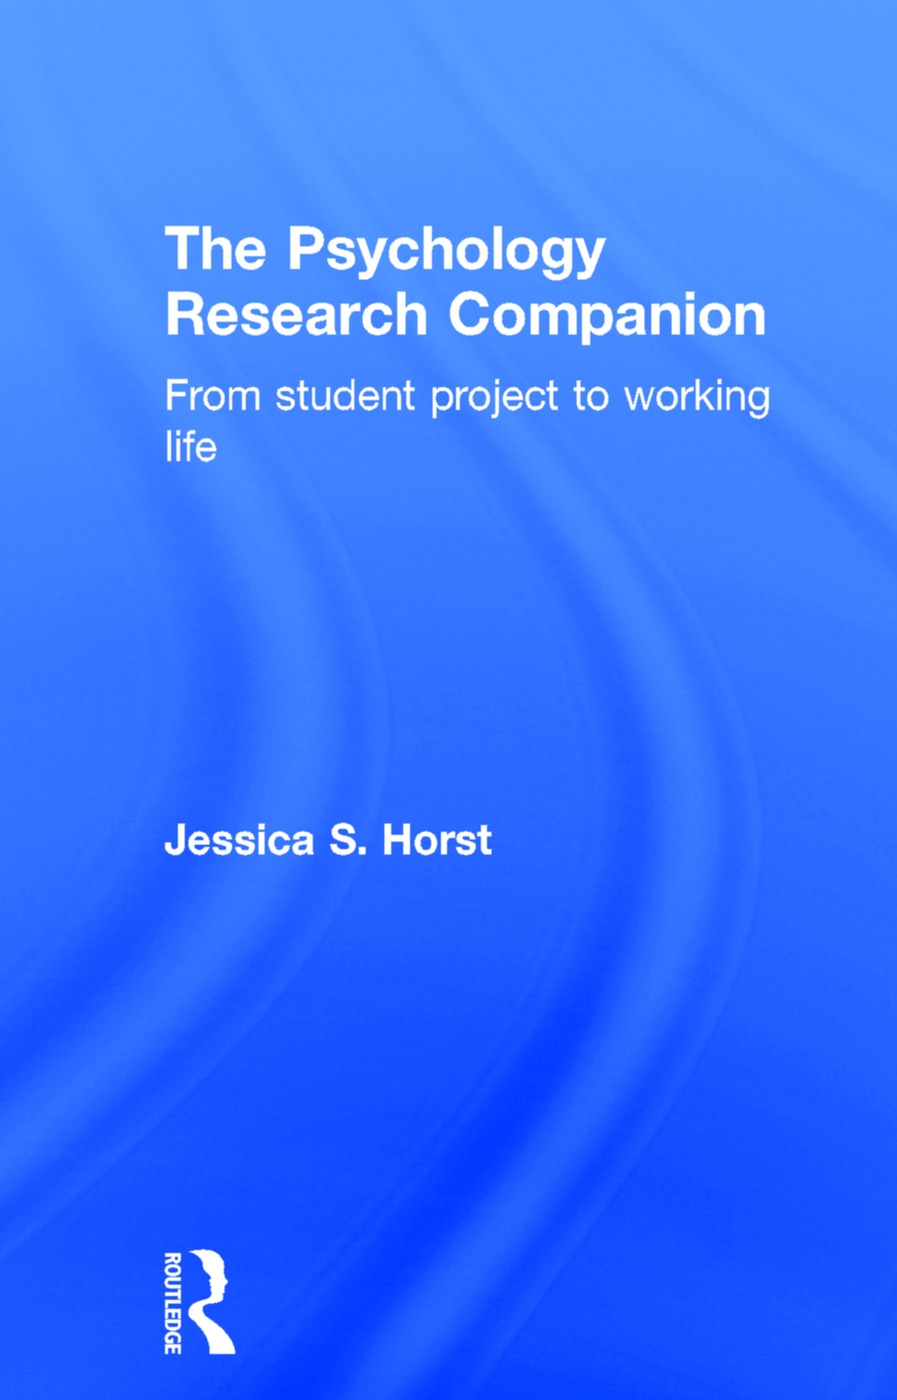 The Psychology Research Companion: From Student Project to Working Life